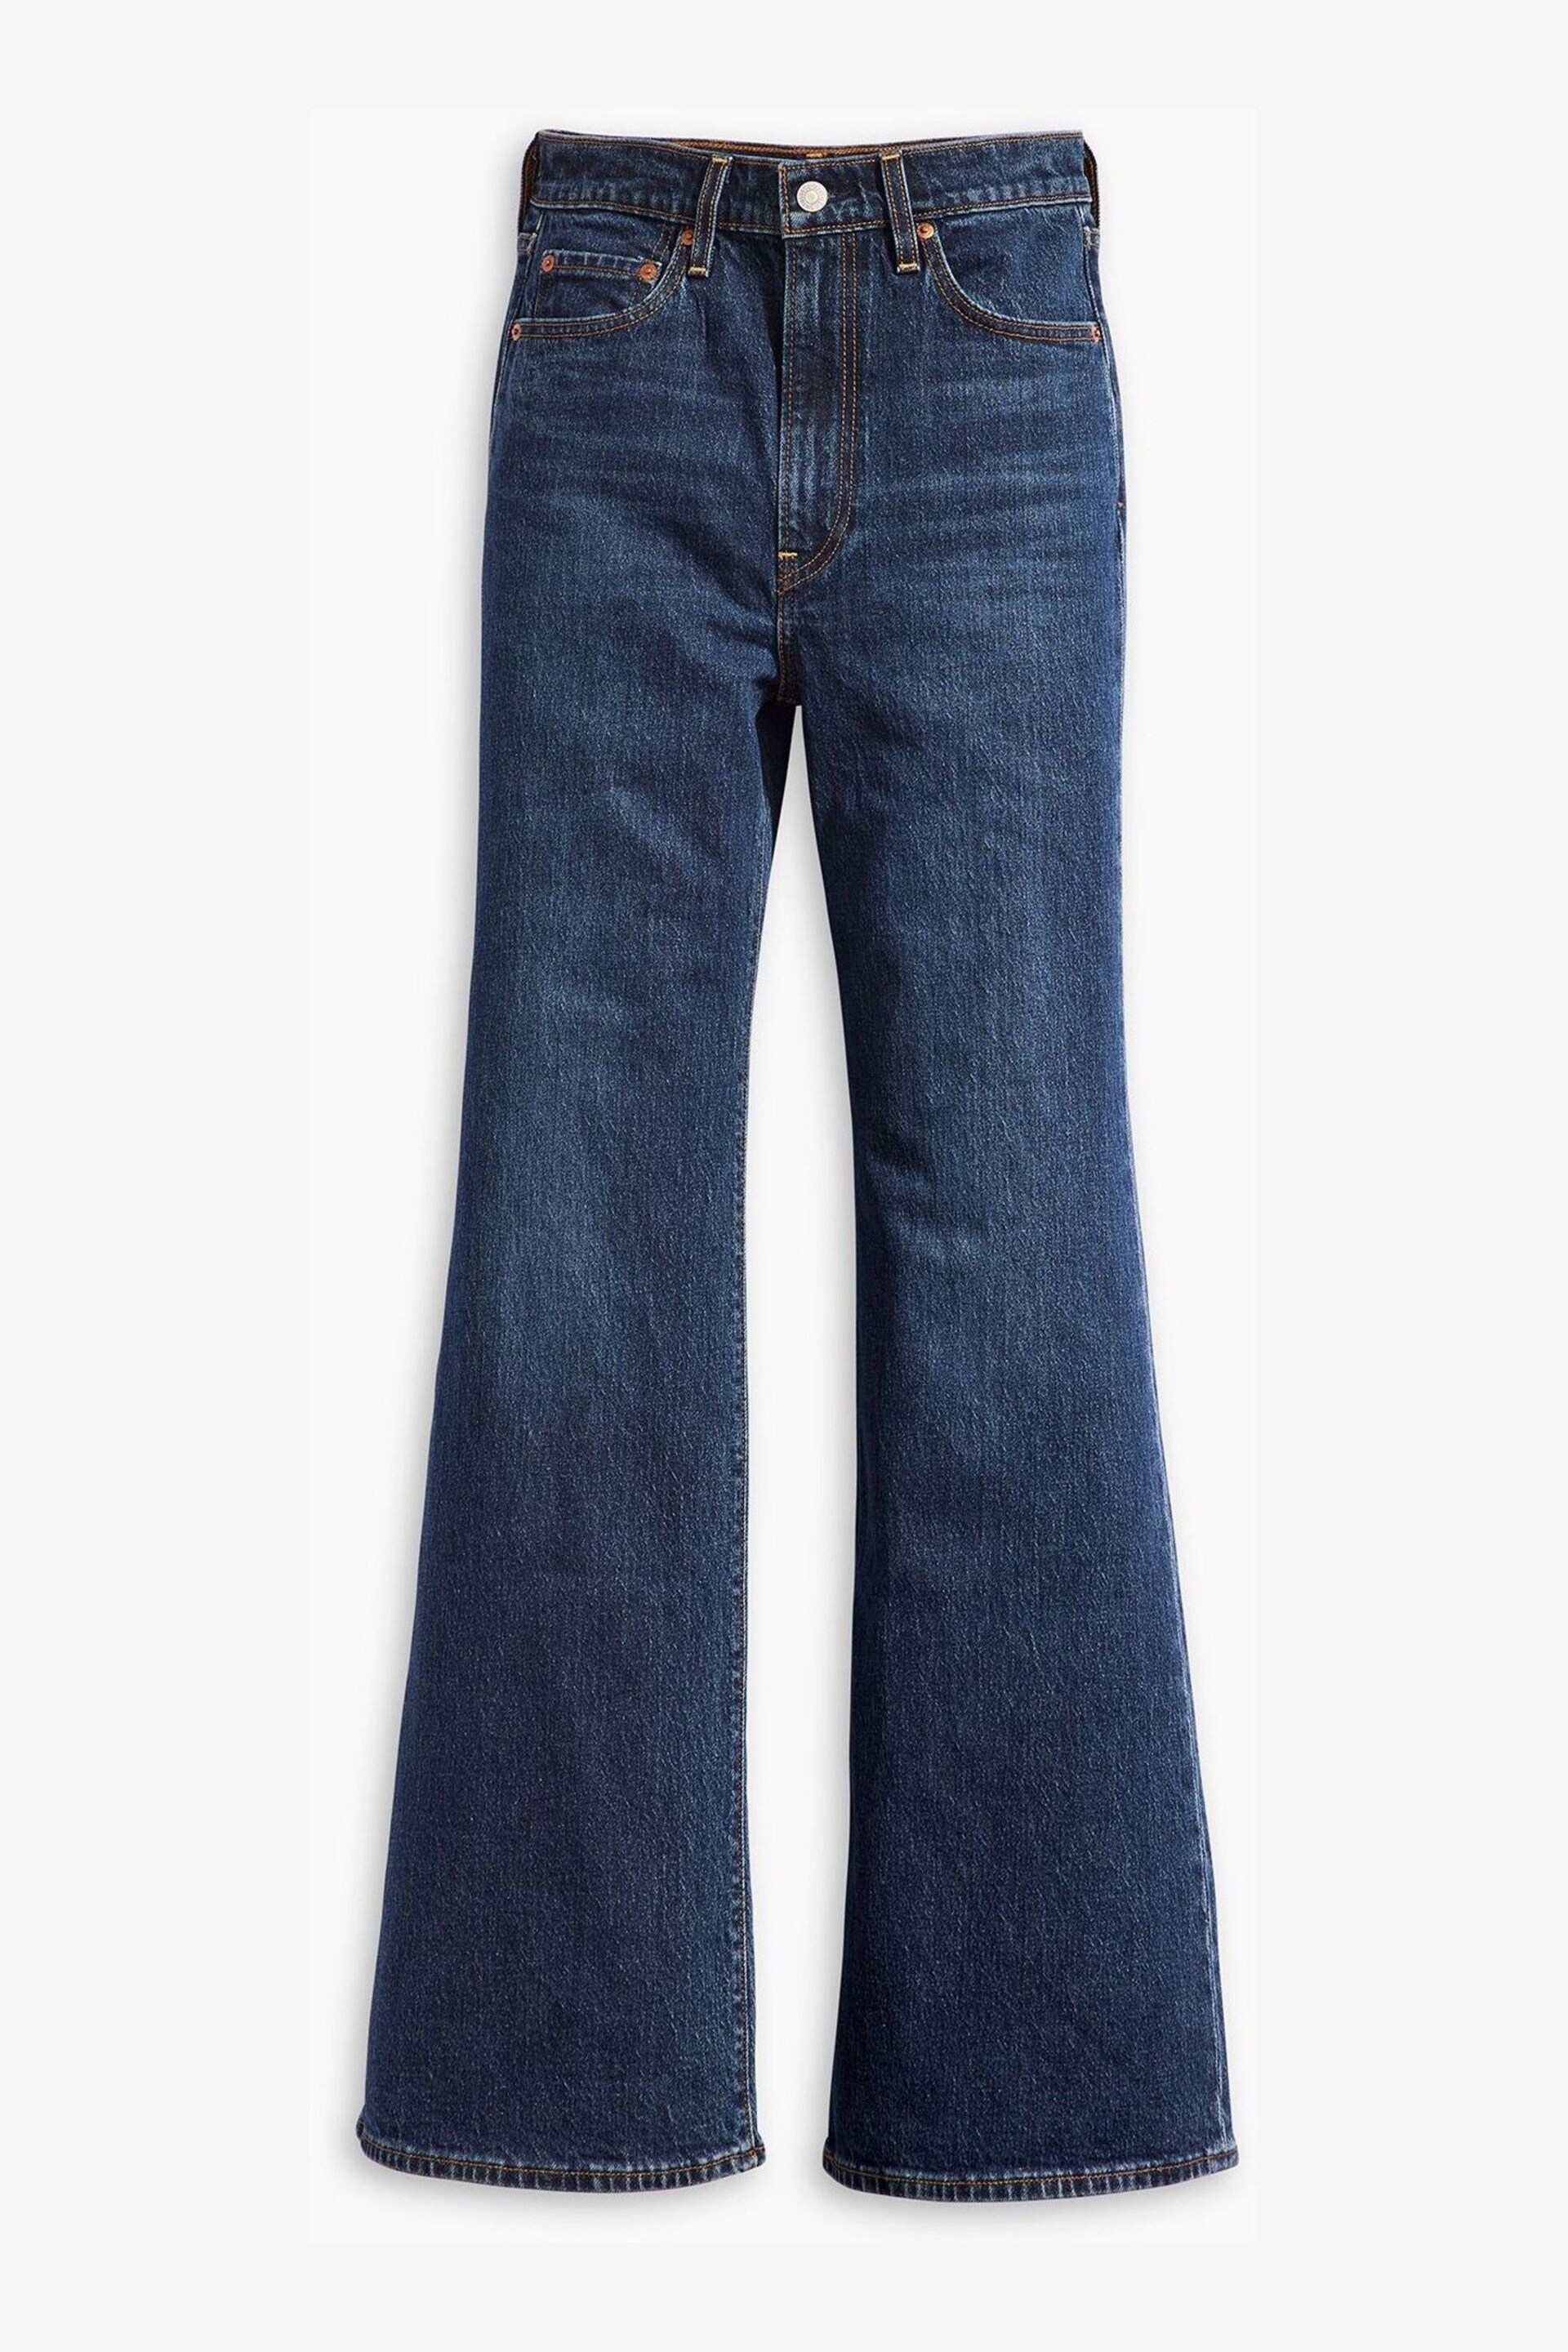 Levi's® Sonoma Train Ribcage Bell Jeans - Image 10 of 12